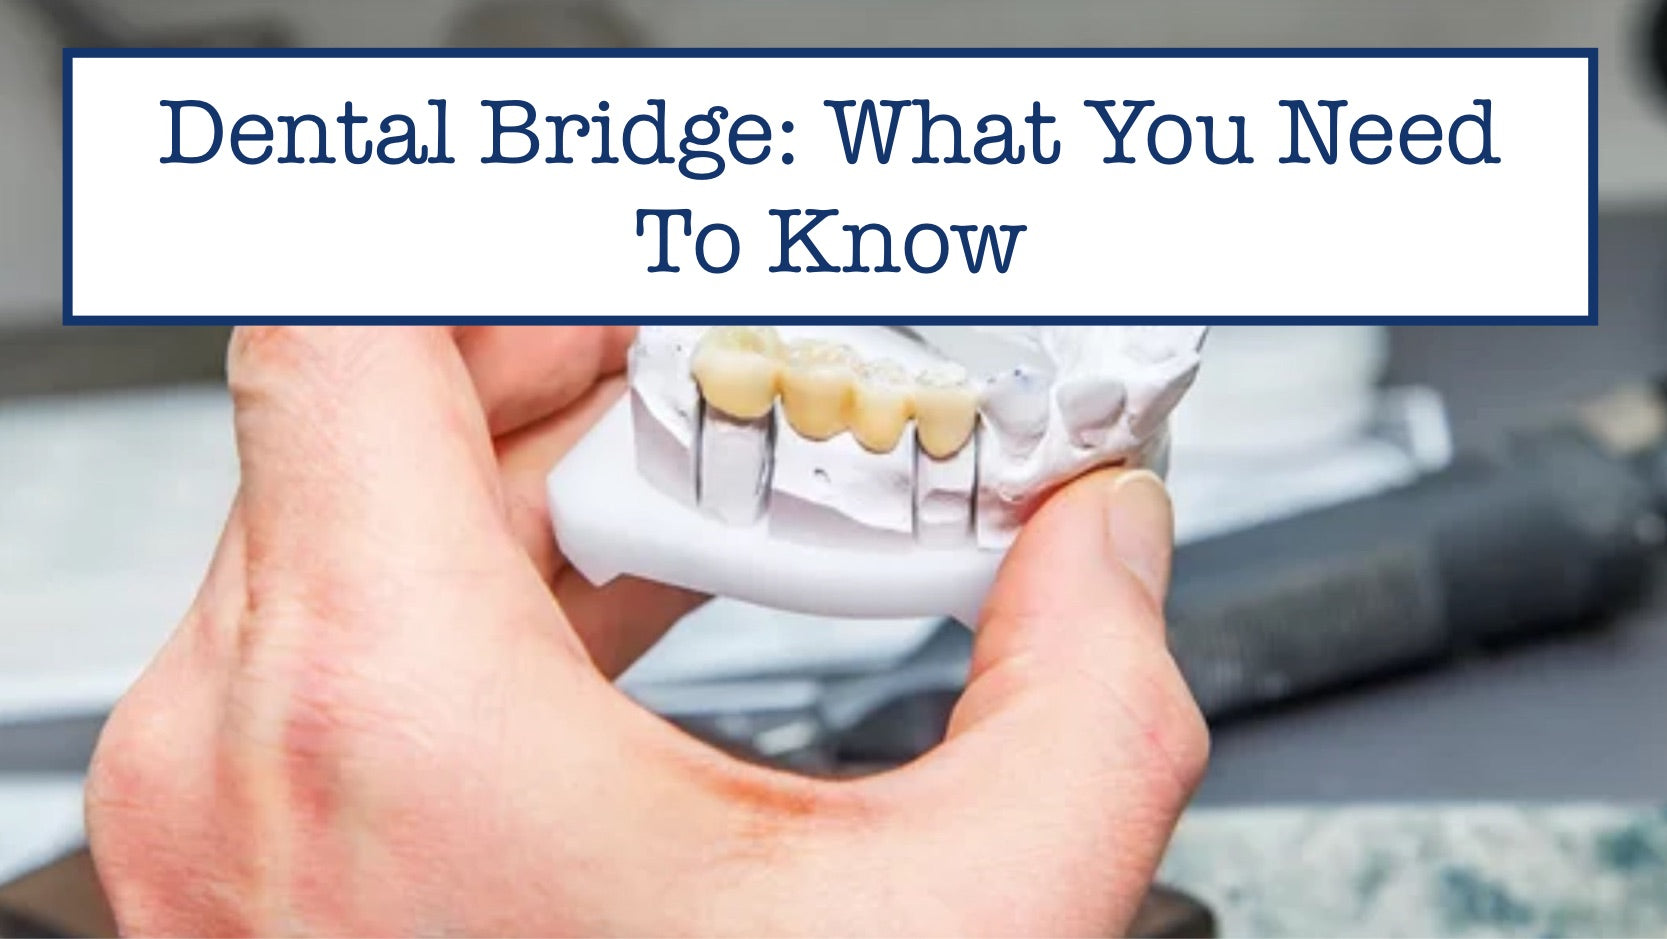 Dental Bridge: What You Need To Know